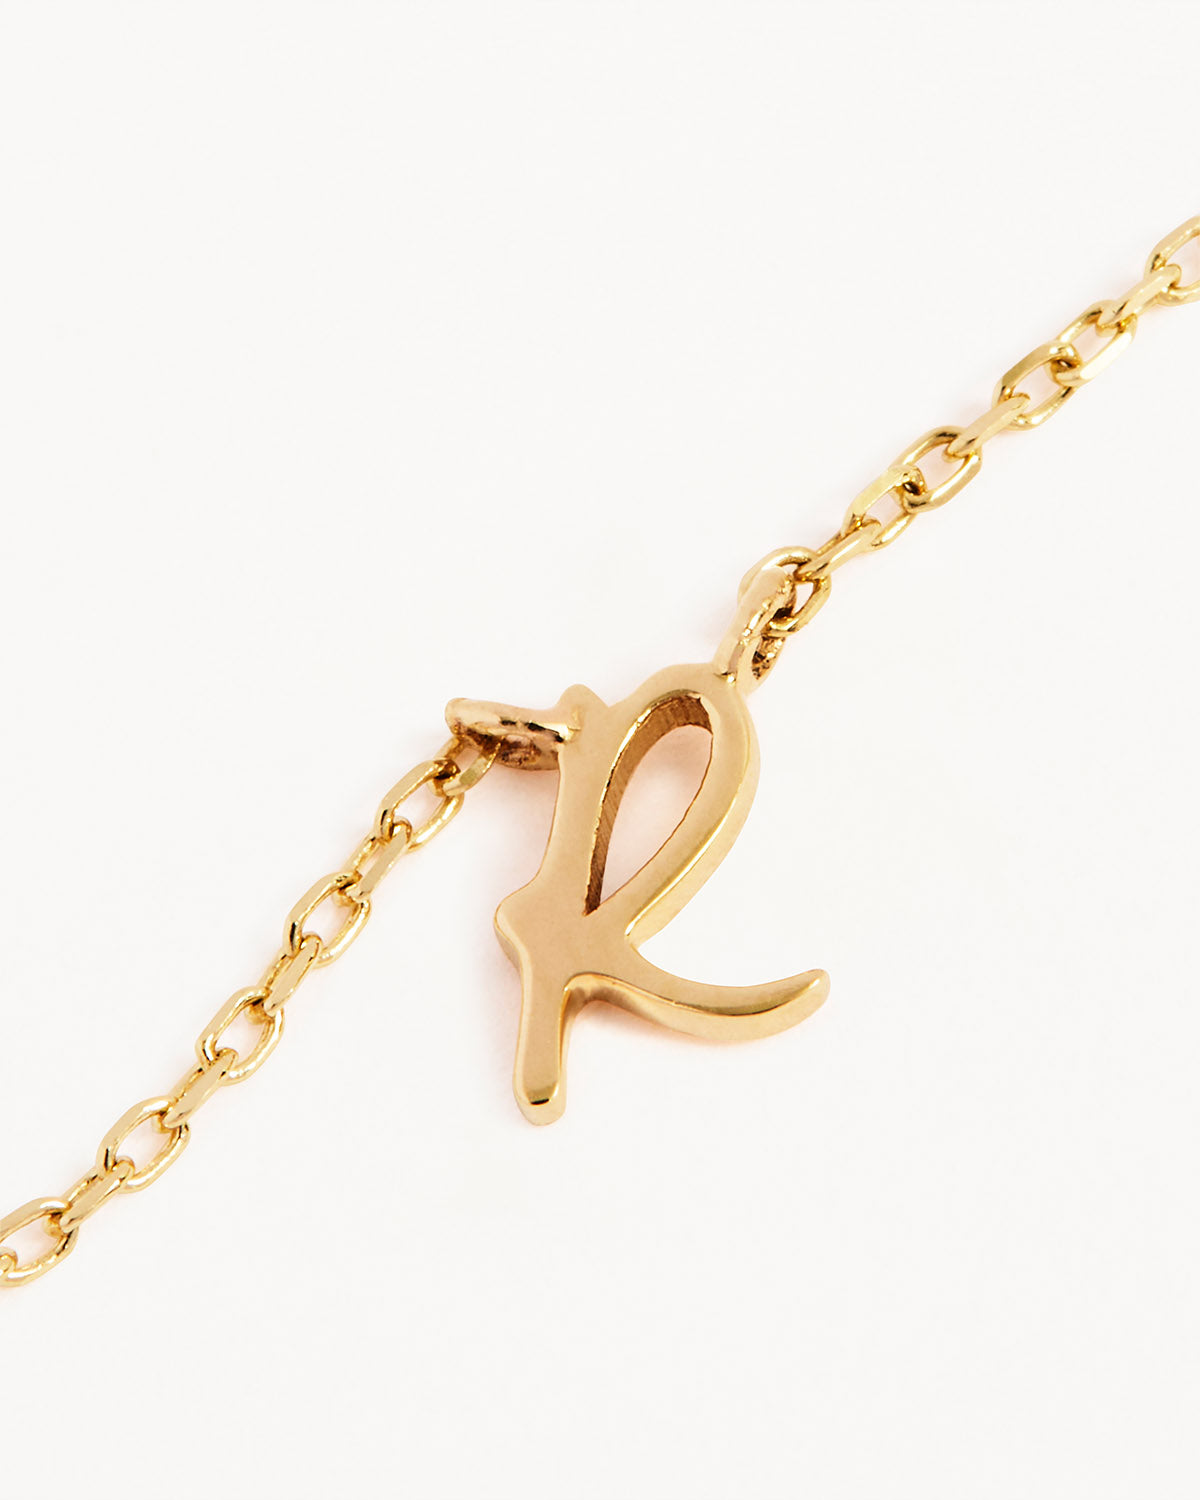 Buy Large Capital Letter L Necklace, Gold Initial Necklace, Oversized Big  Capital Letter L Alphabet Personalized Necklace Jewelry, Gift Ideas Online  in India - Etsy